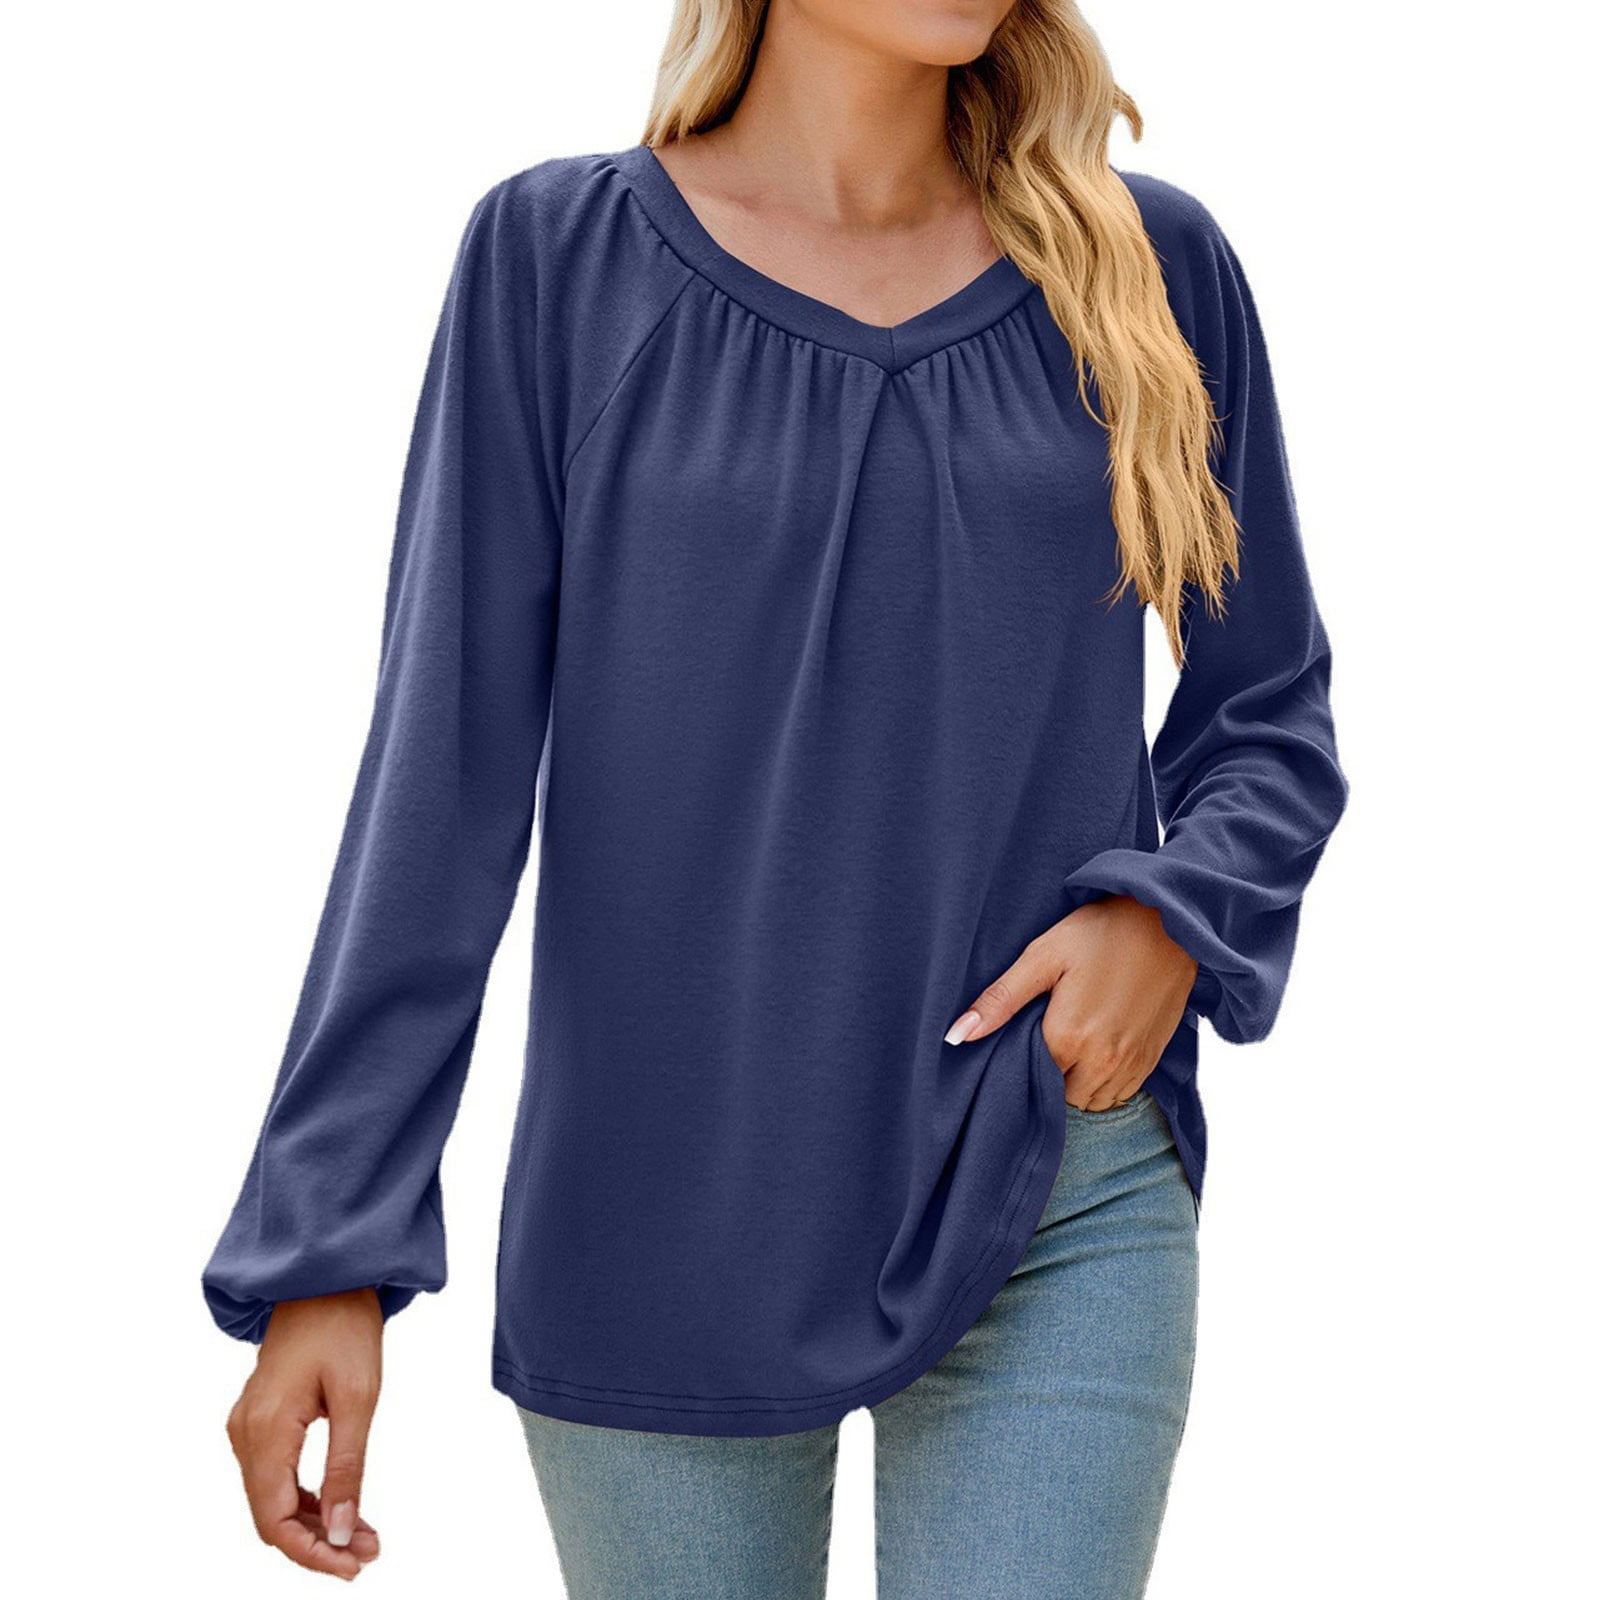 Nkoogh Shirt for Same Day Delivery Items Prime Long T Shirts for Leggings for Women Women's New Fall and Winter Solid Color Long Sleeved V Neck Loose